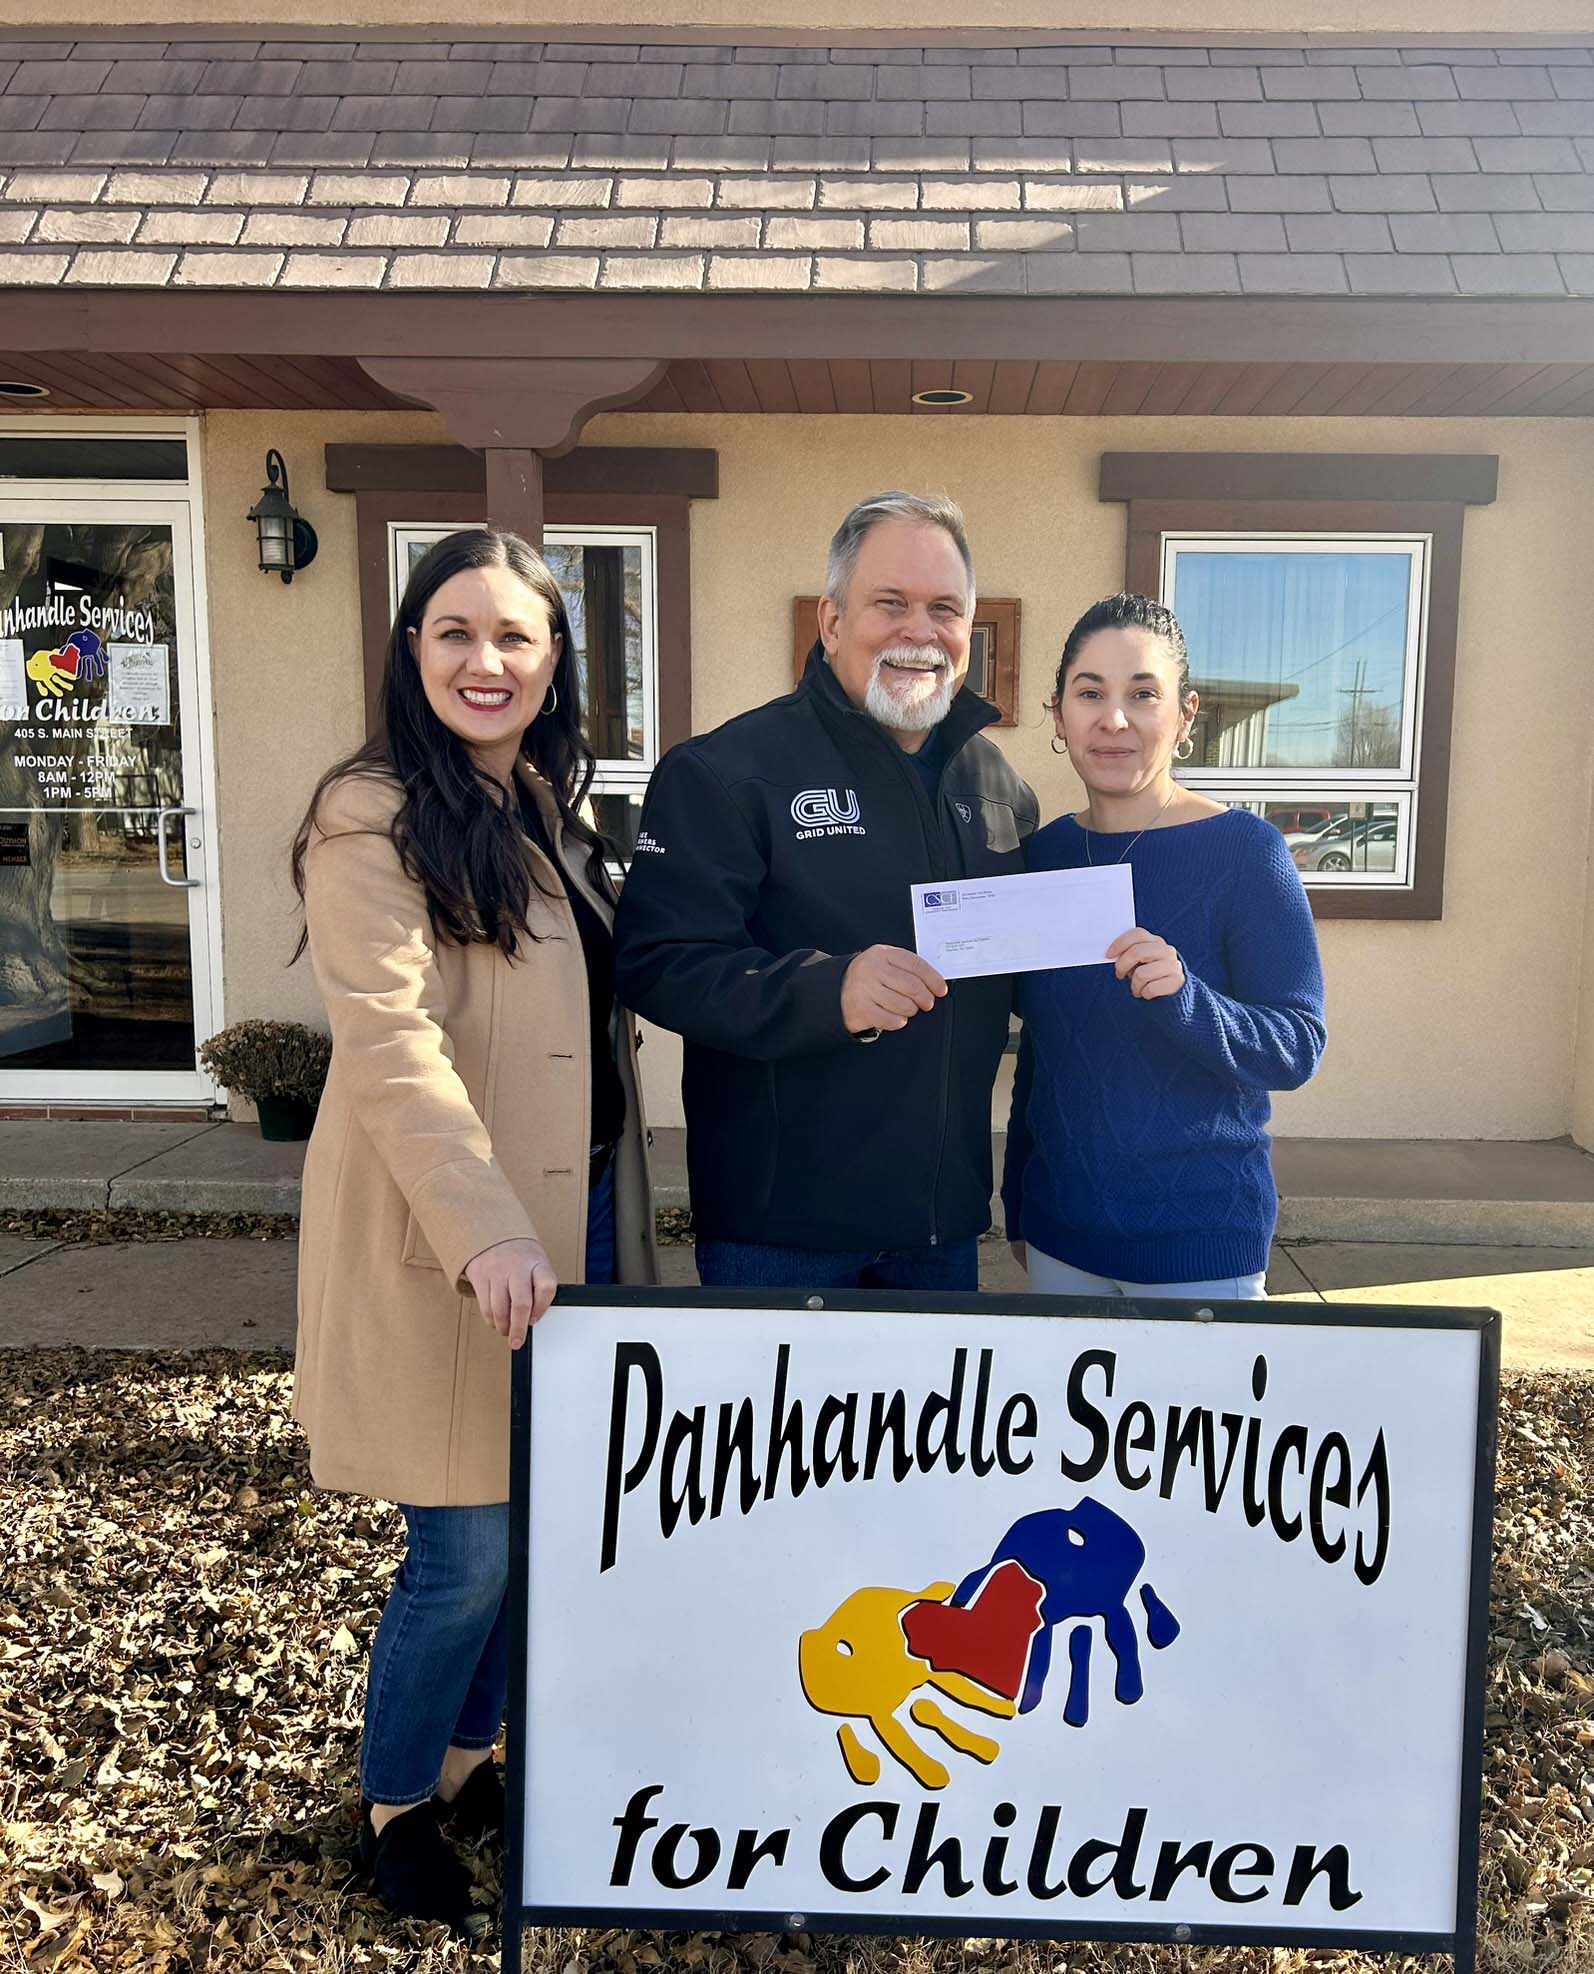 Panhandle Services for Children - pictured left to right - Carrie Sanders, CSCF Executive Director; Alan Manning, Three Corners Connector Project Communications Specialist; presents check to Jessica Martinez, Panhandle Services for Children Executive Director